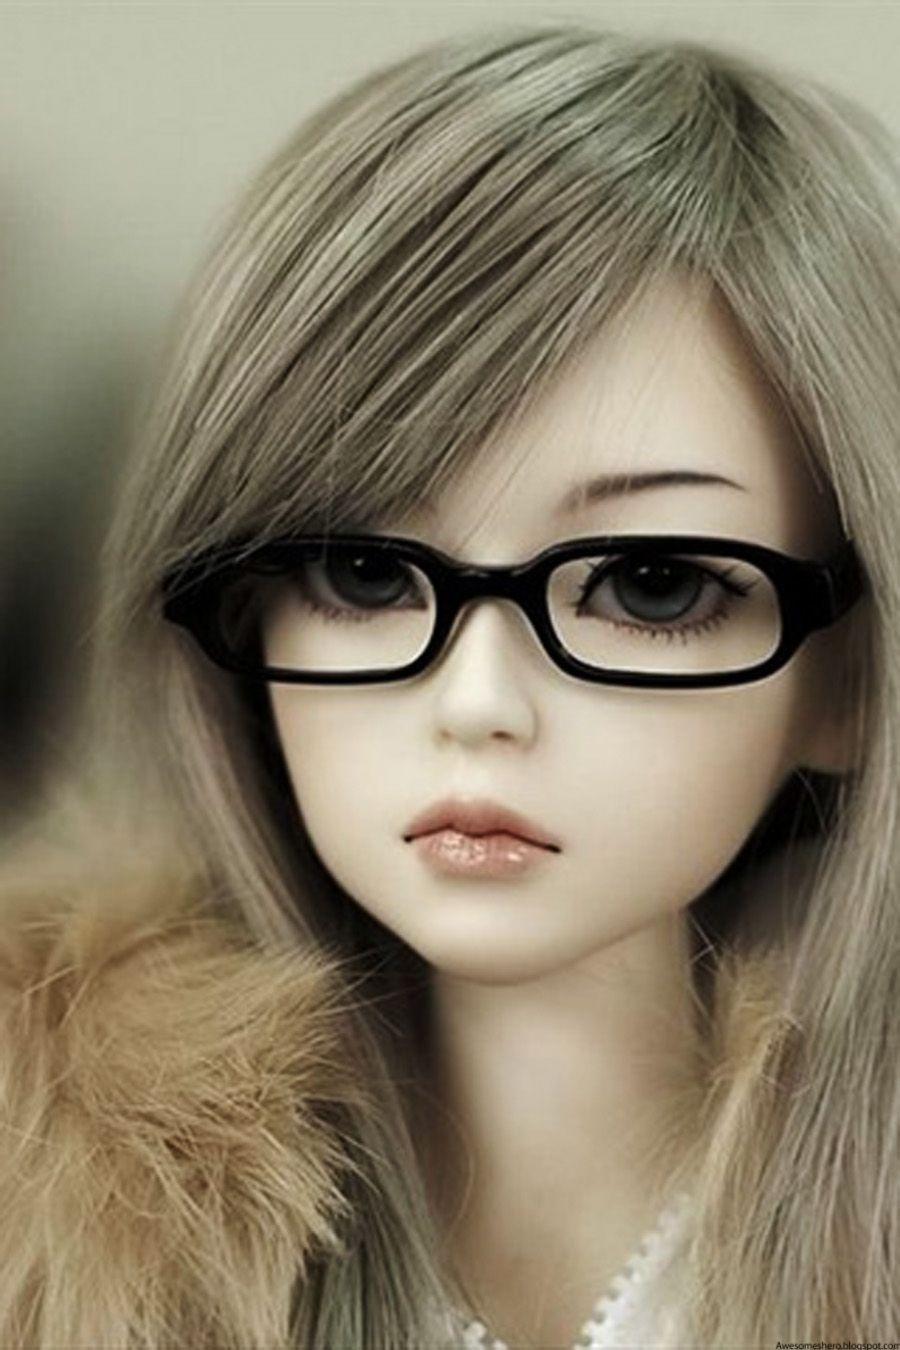 barbie doll wallpapers backgrounds